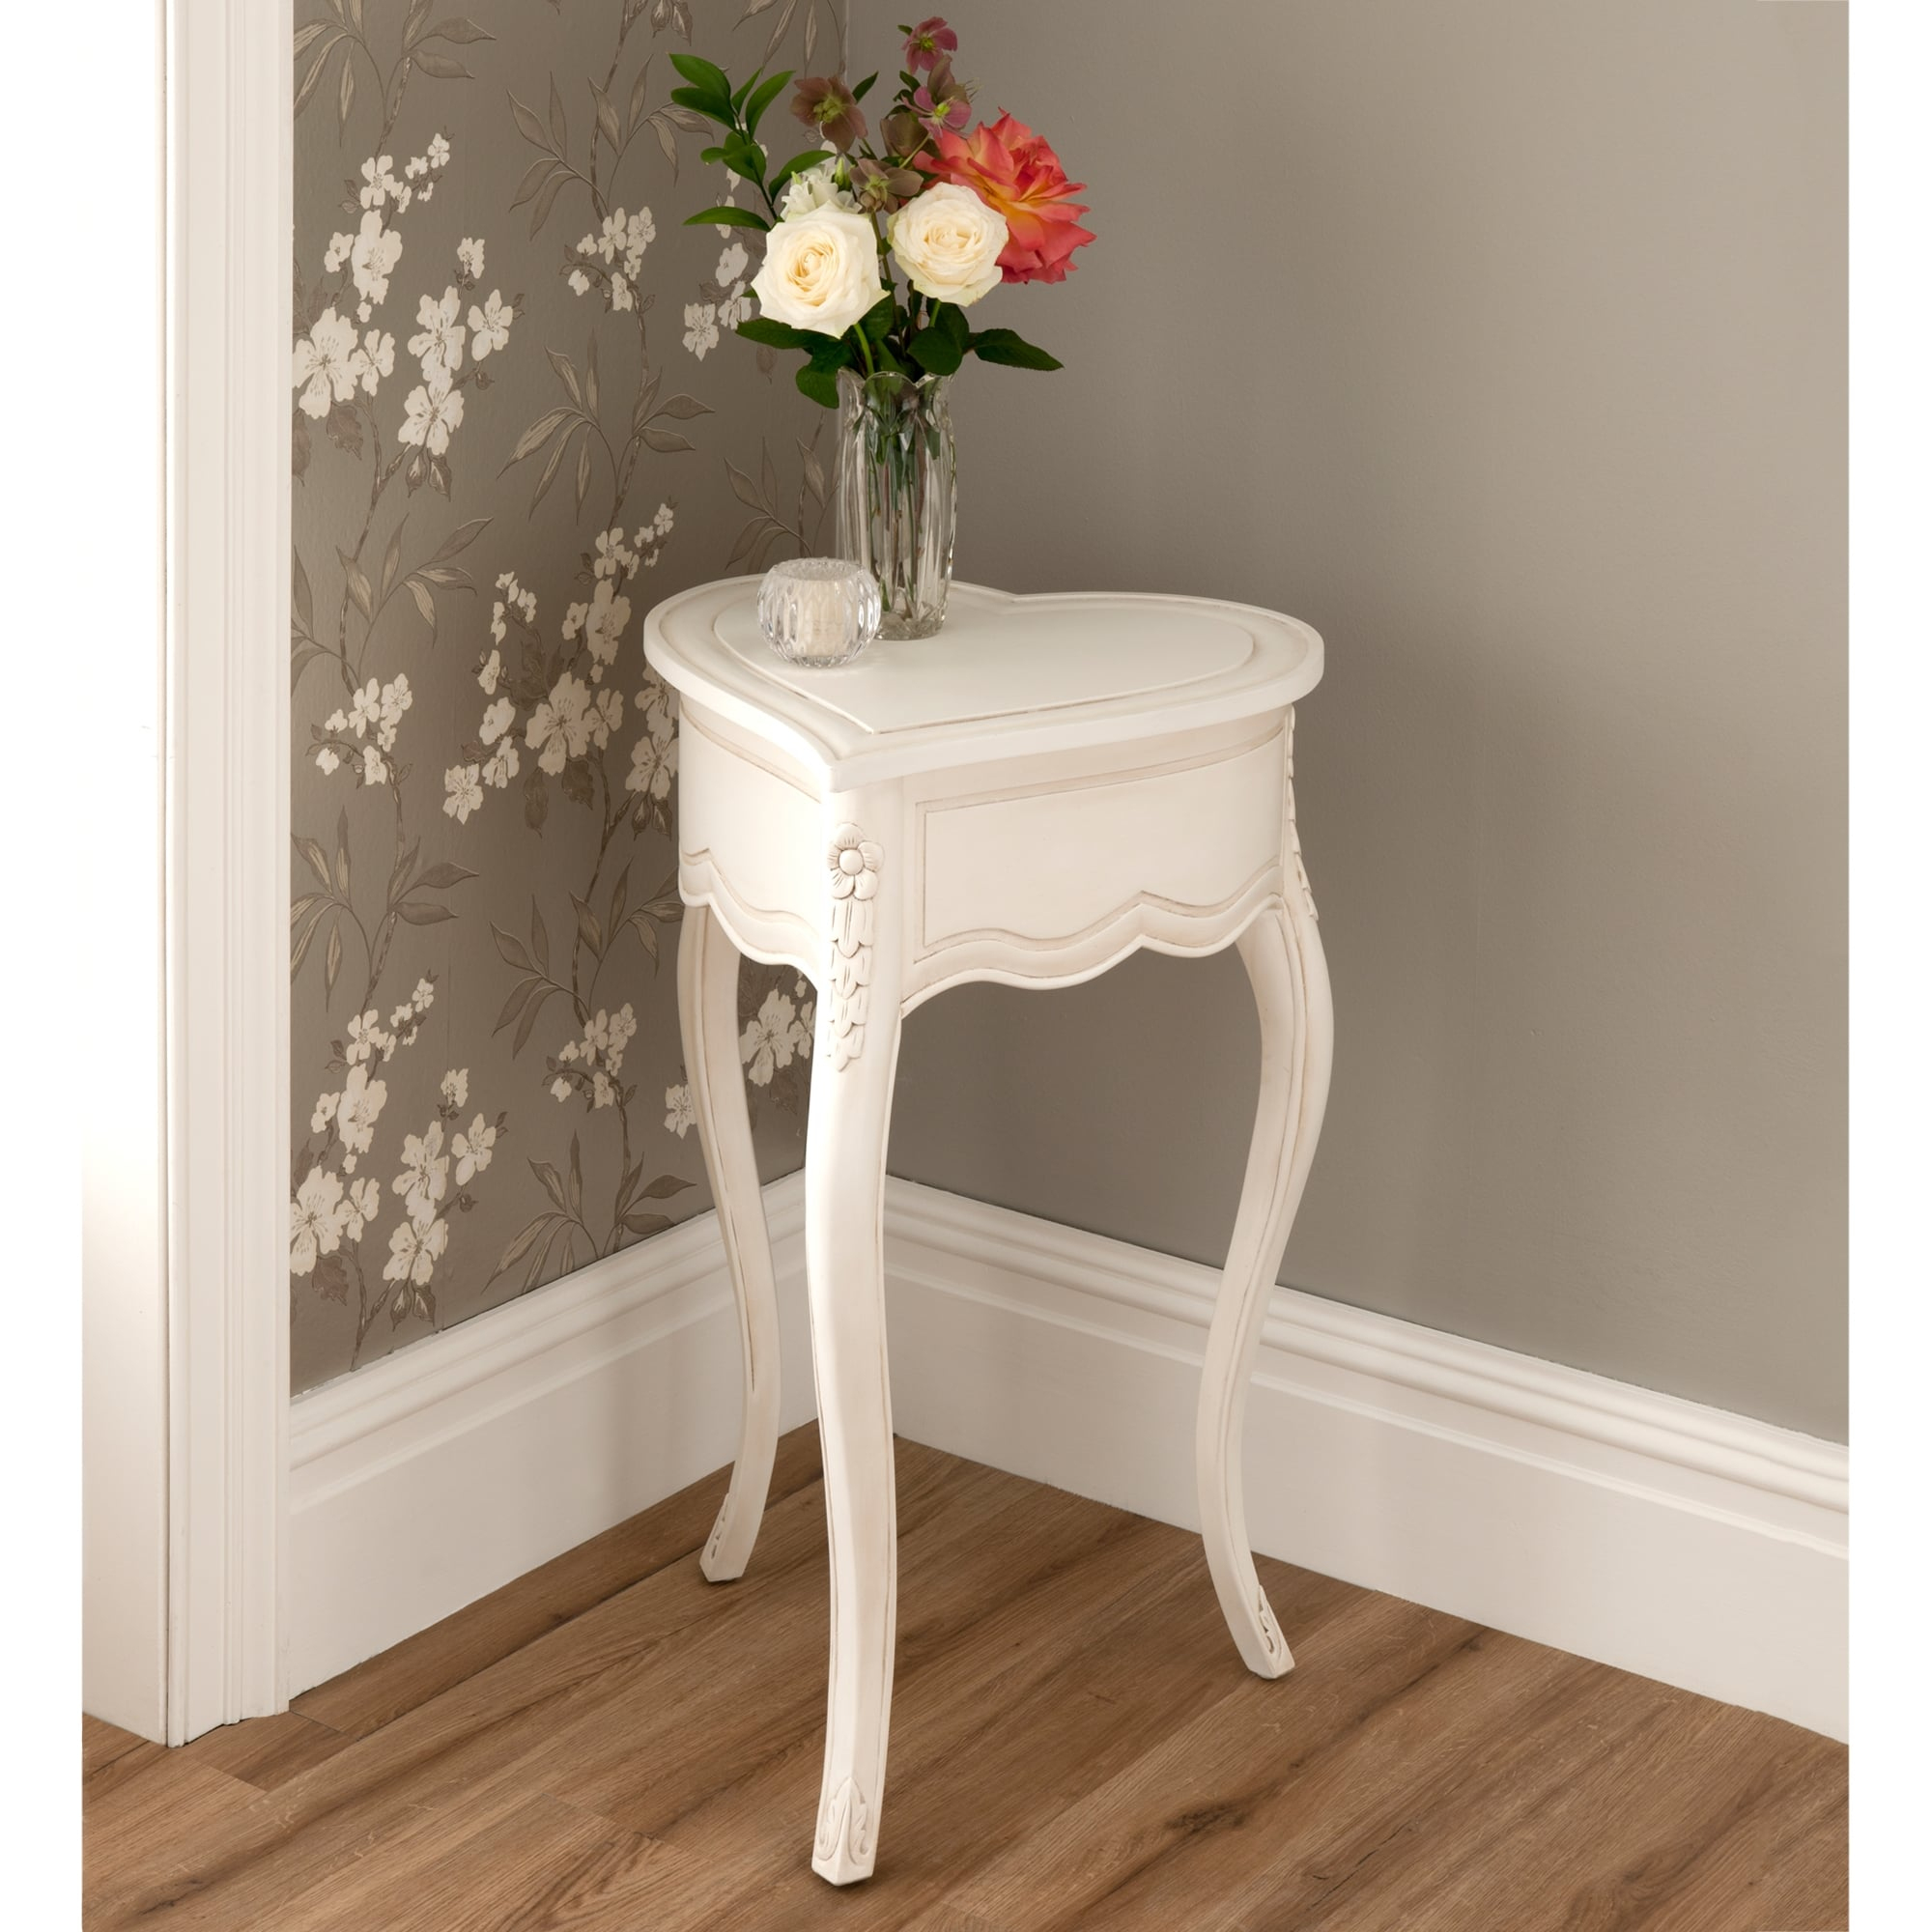 La Rochelle Love Heart Antique French Side Table  Furniture intérieur White French Country End Tables 